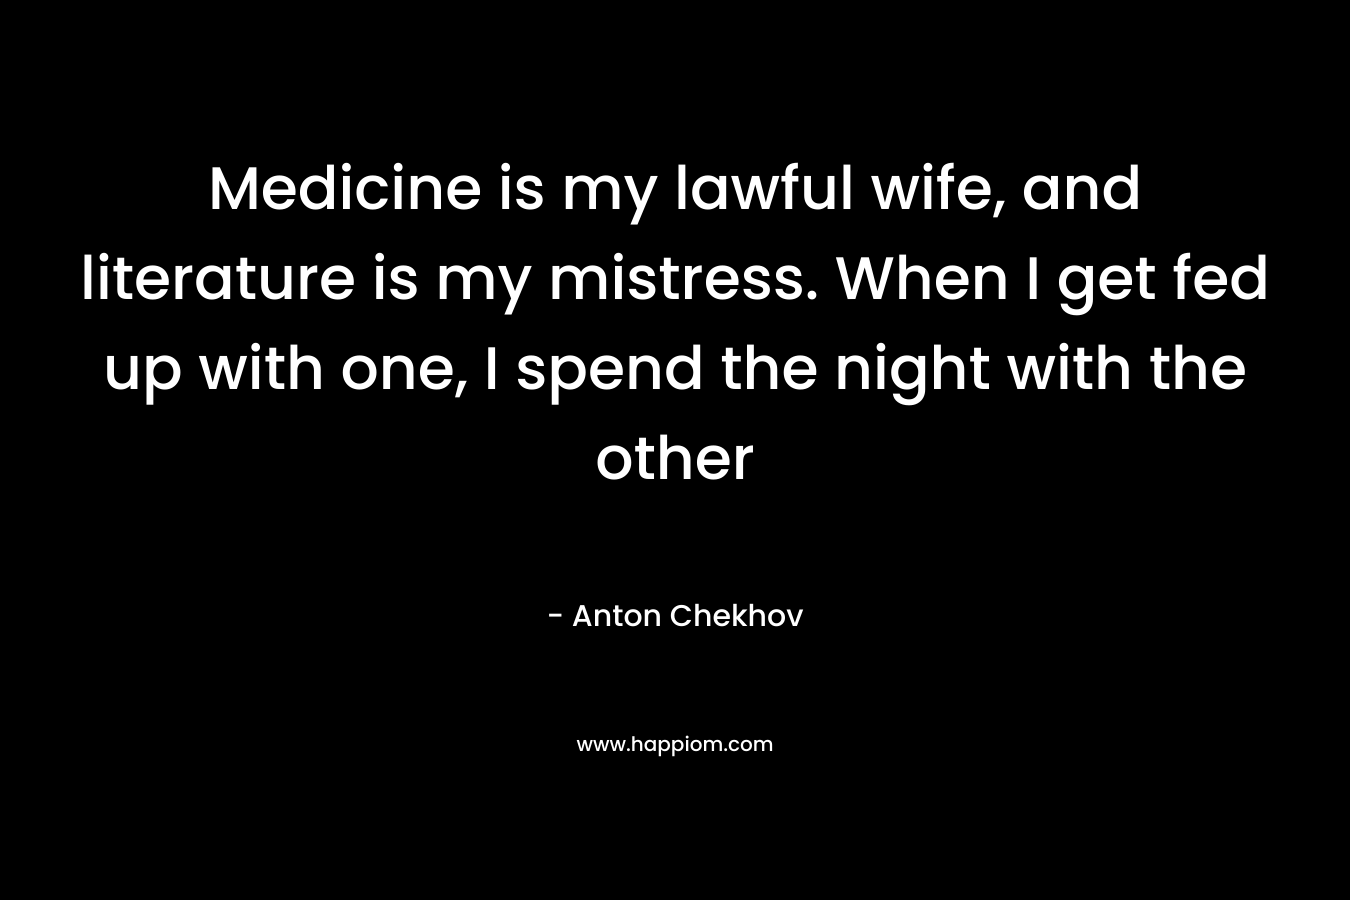 Medicine is my lawful wife, and literature is my mistress. When I get fed up with one, I spend the night with the other – Anton Chekhov